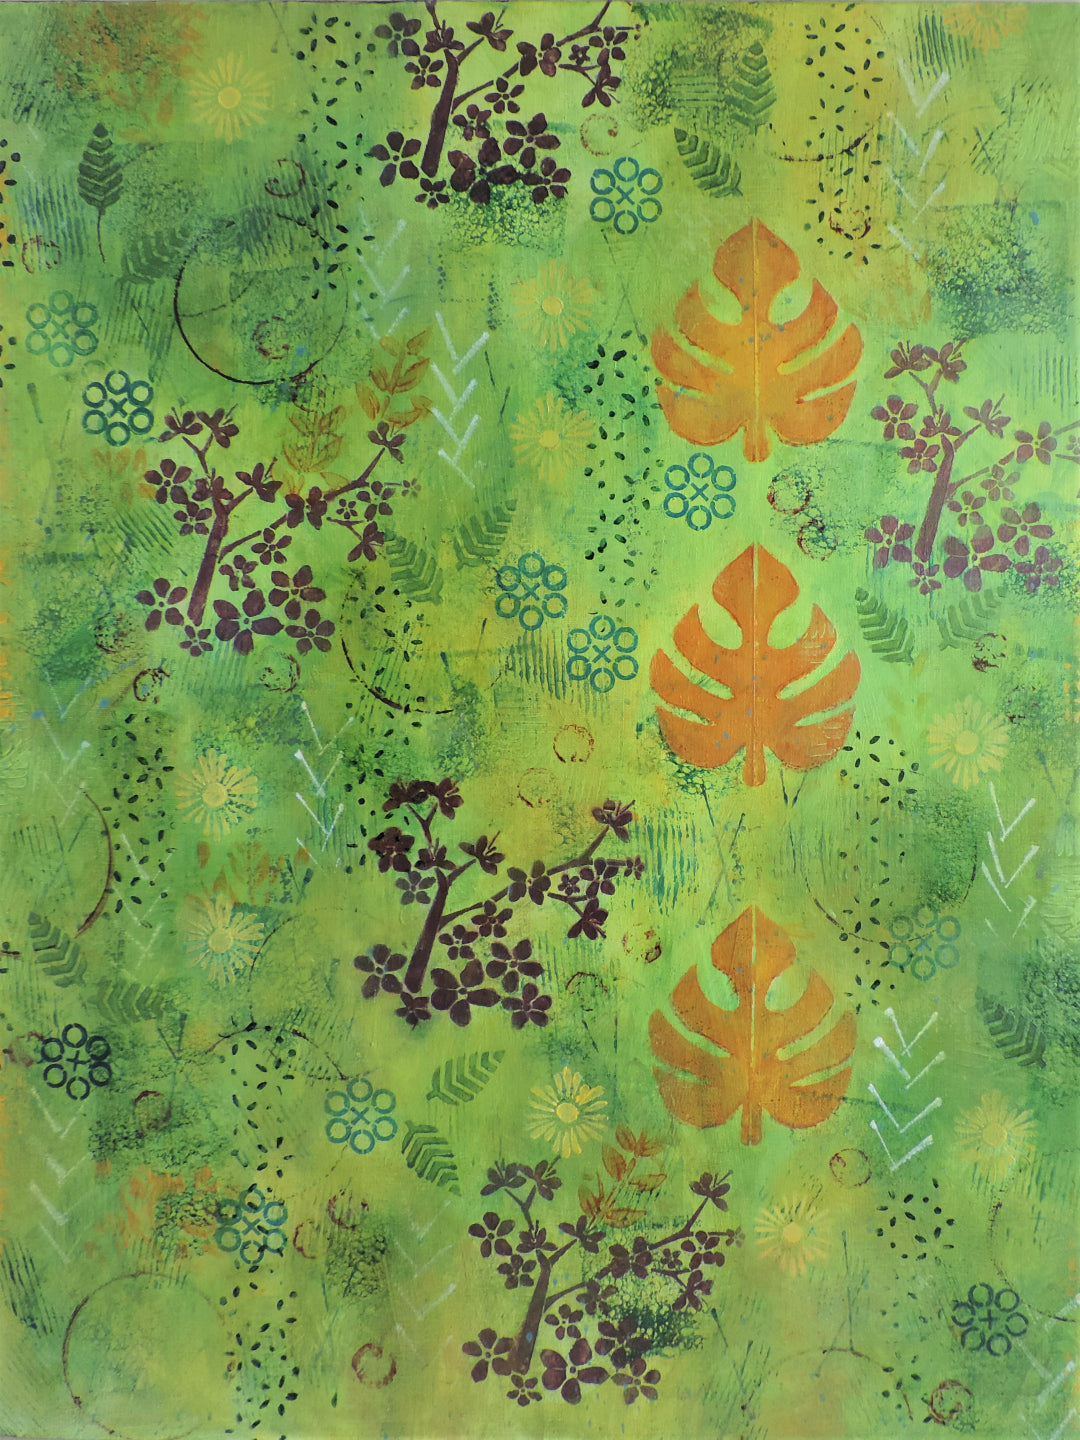 forest theme abstract acrylic painting on canvas green background with purple flowers and large orange leaves forest bathing refreshing leaf scene stencils and movement